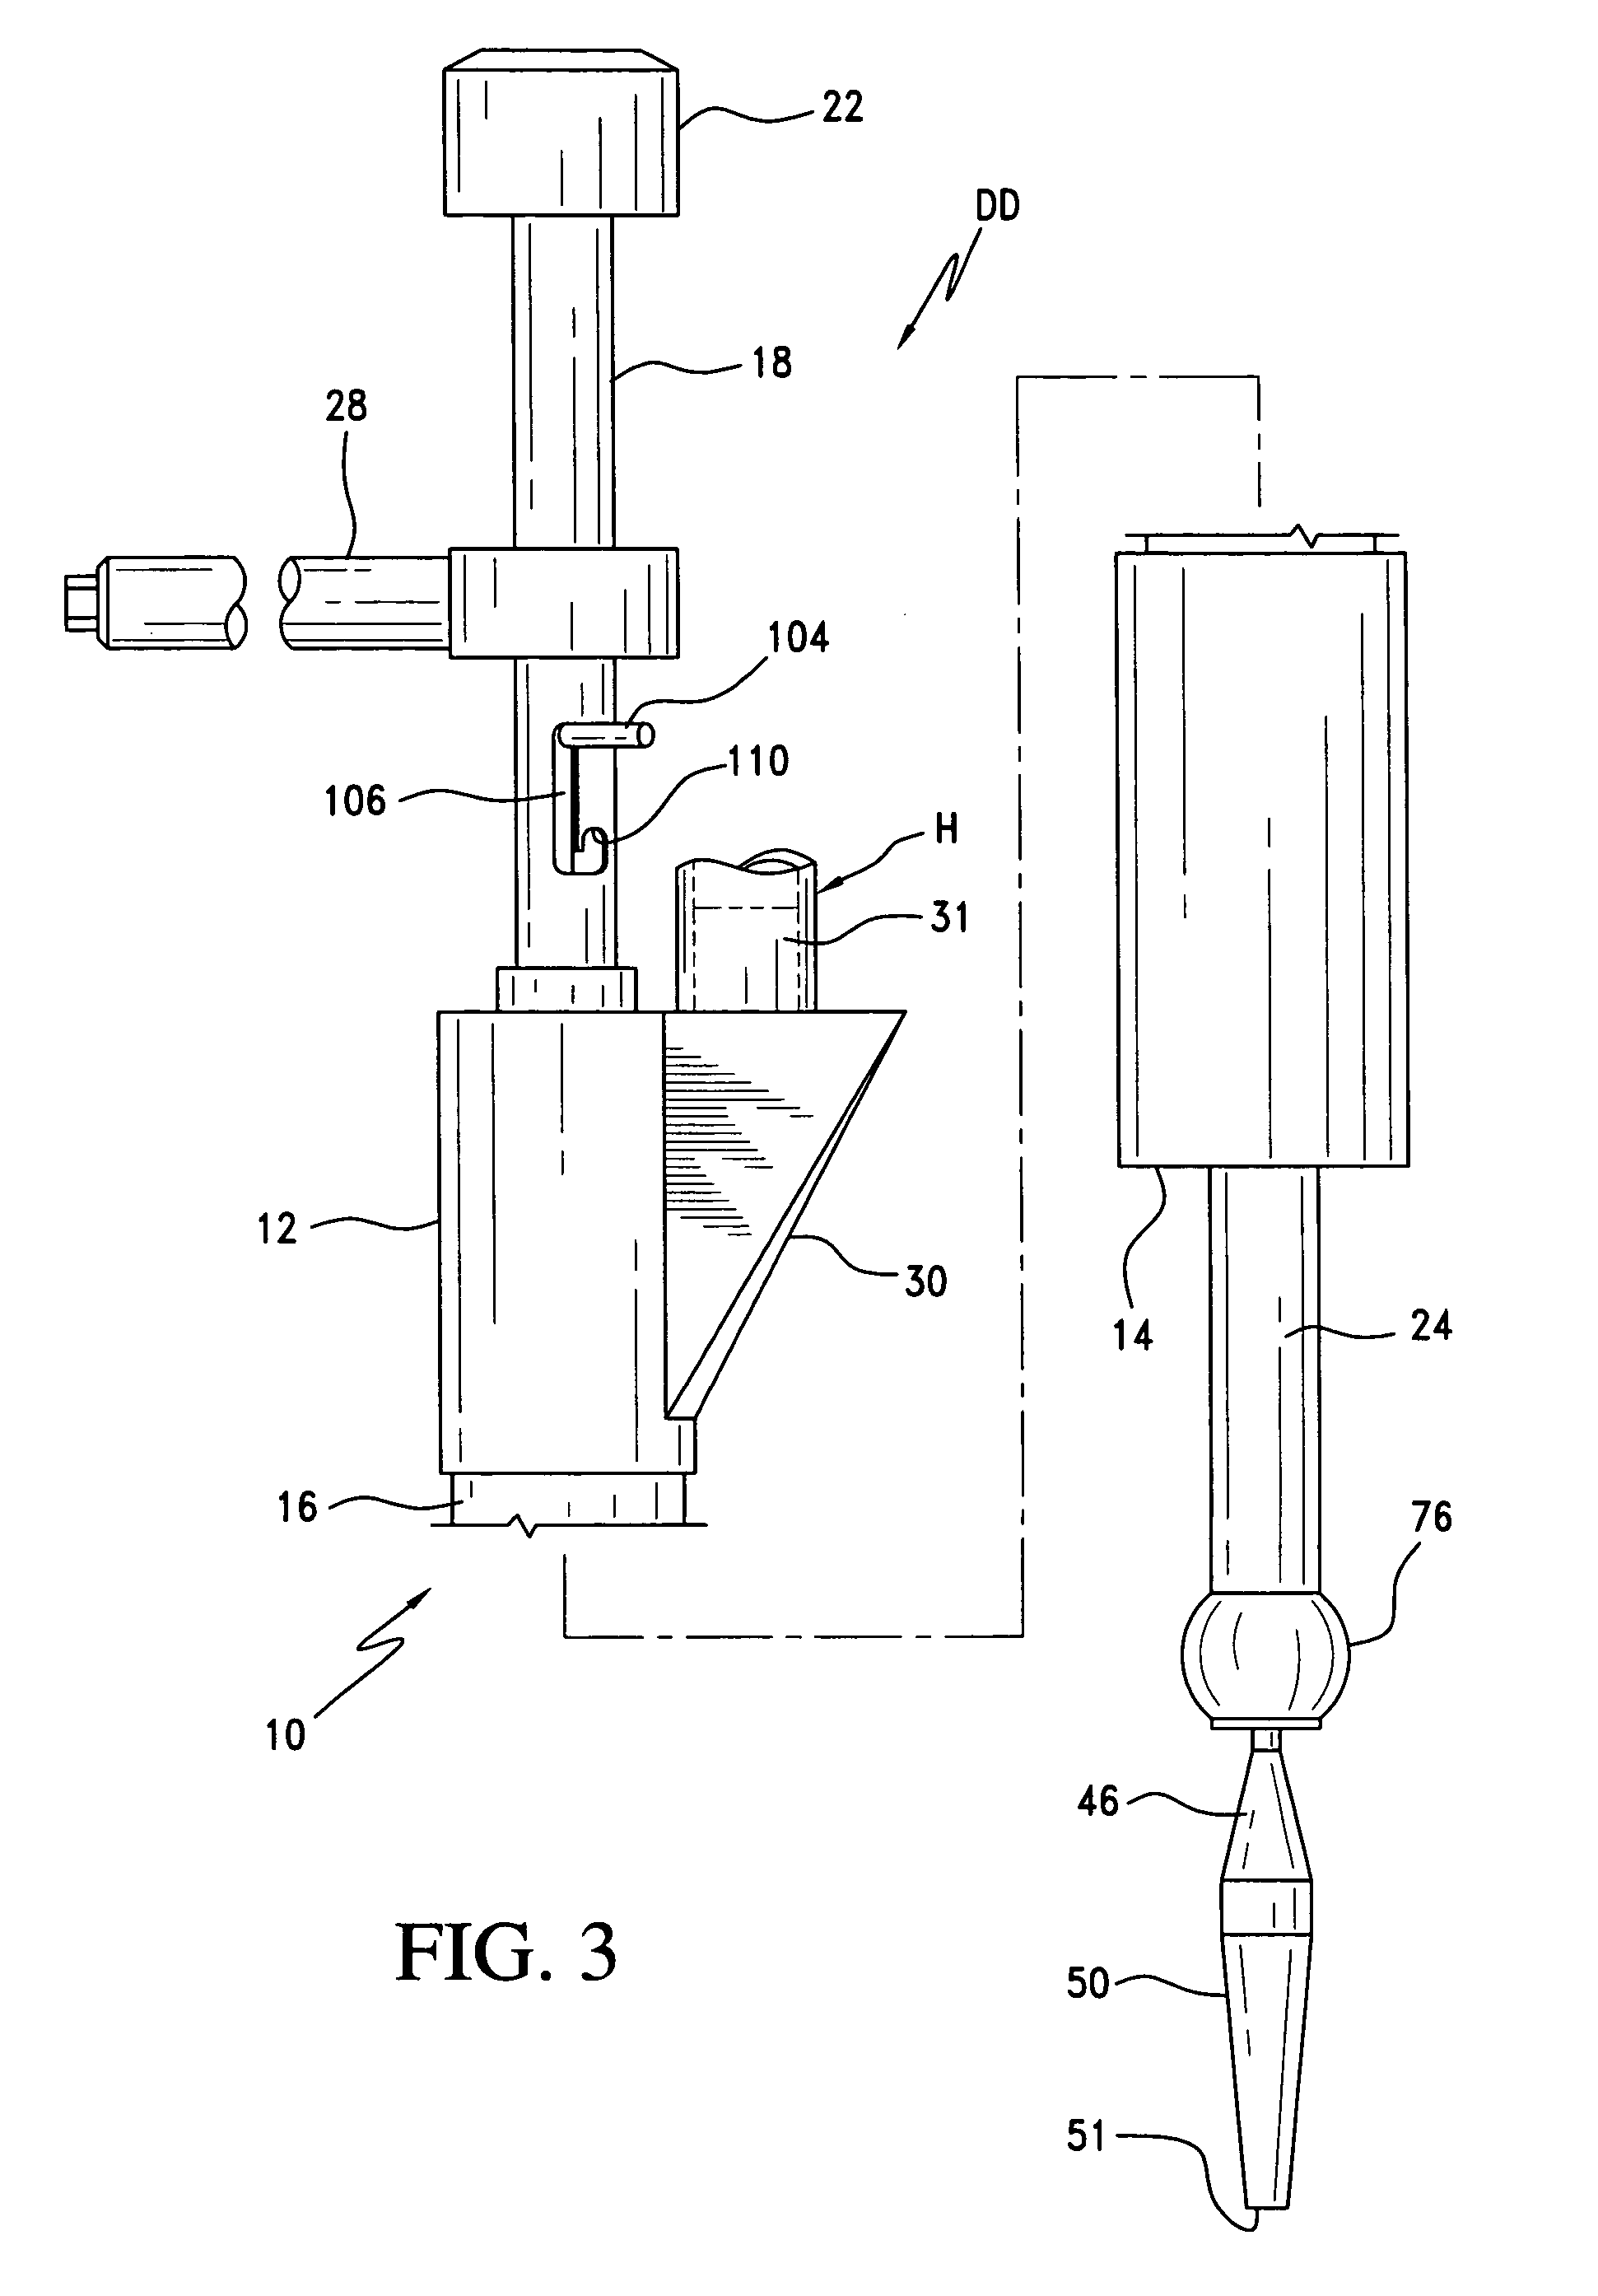 Method and device for dispensing a fertilizer, pesticide, fungicide, herbicide, insecticide, chemical, or the like material